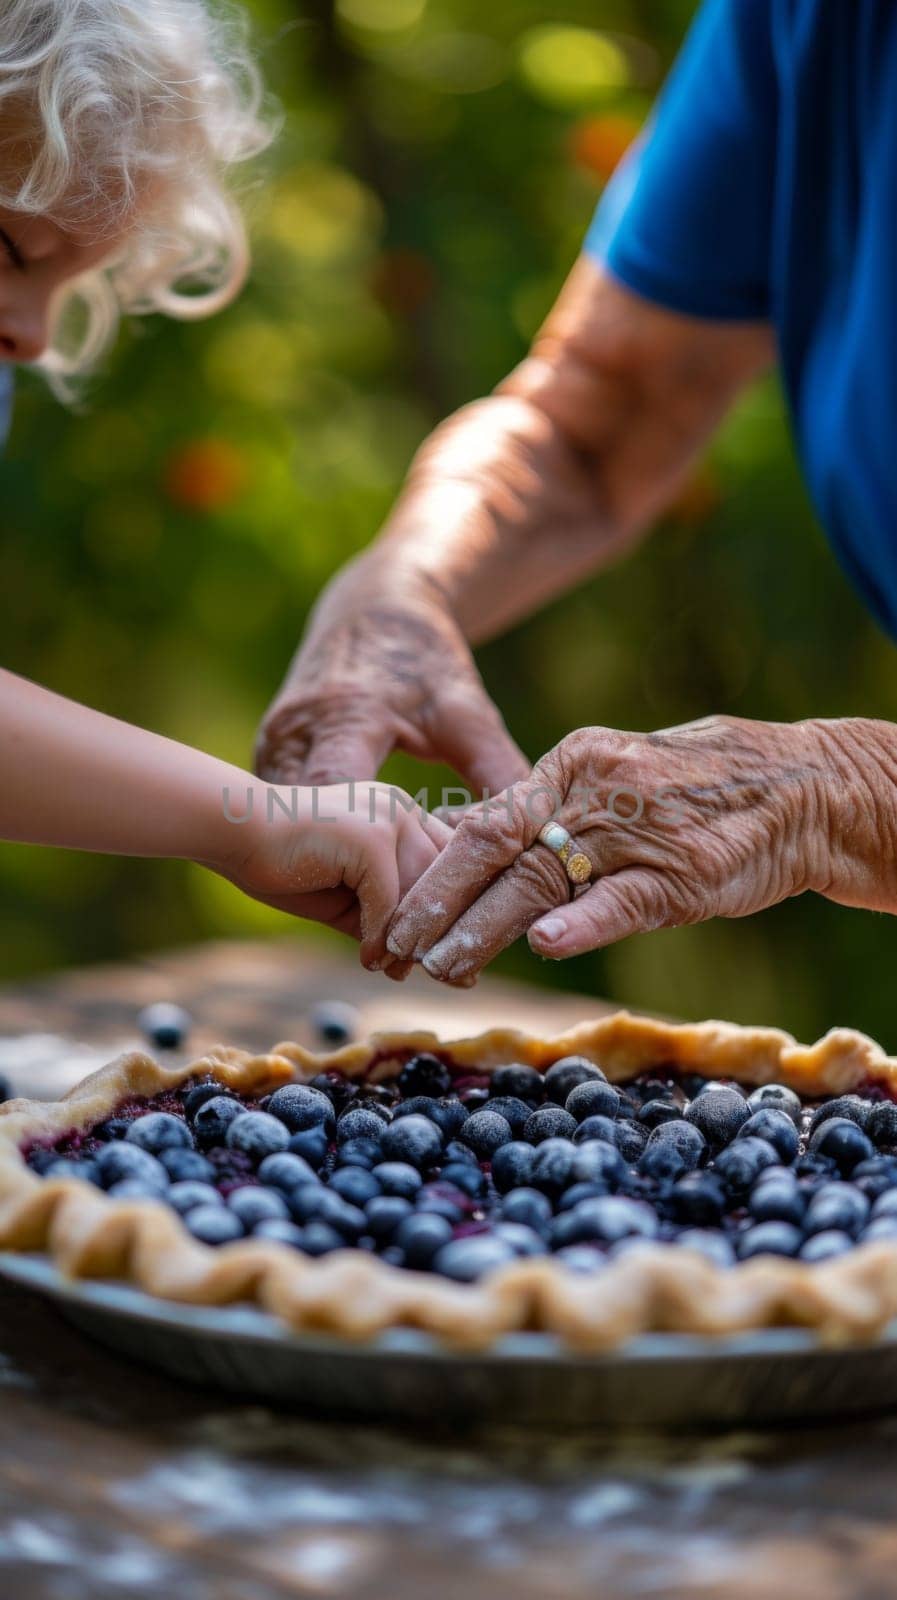 A person helping another to reach into a pie with blueberries